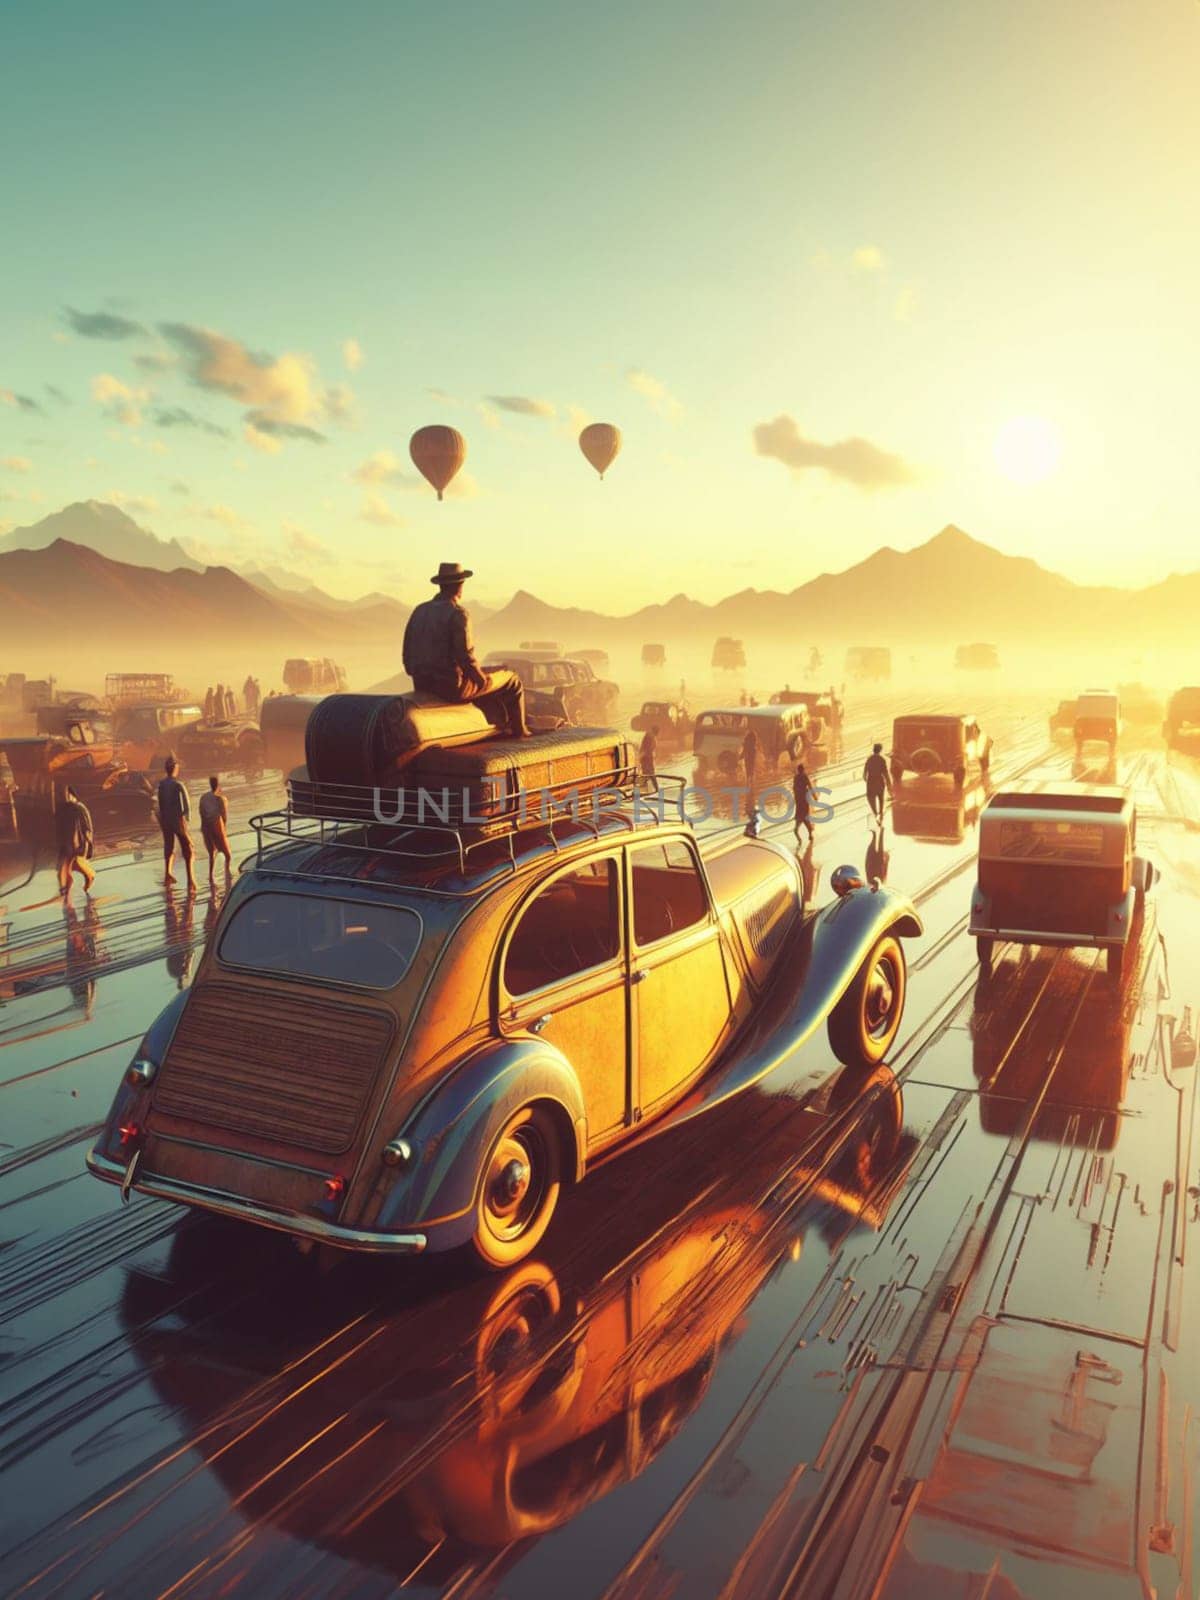 Huge Stack of luggage on crowded car roof , migration wave concept, steampunk retro illustration by verbano